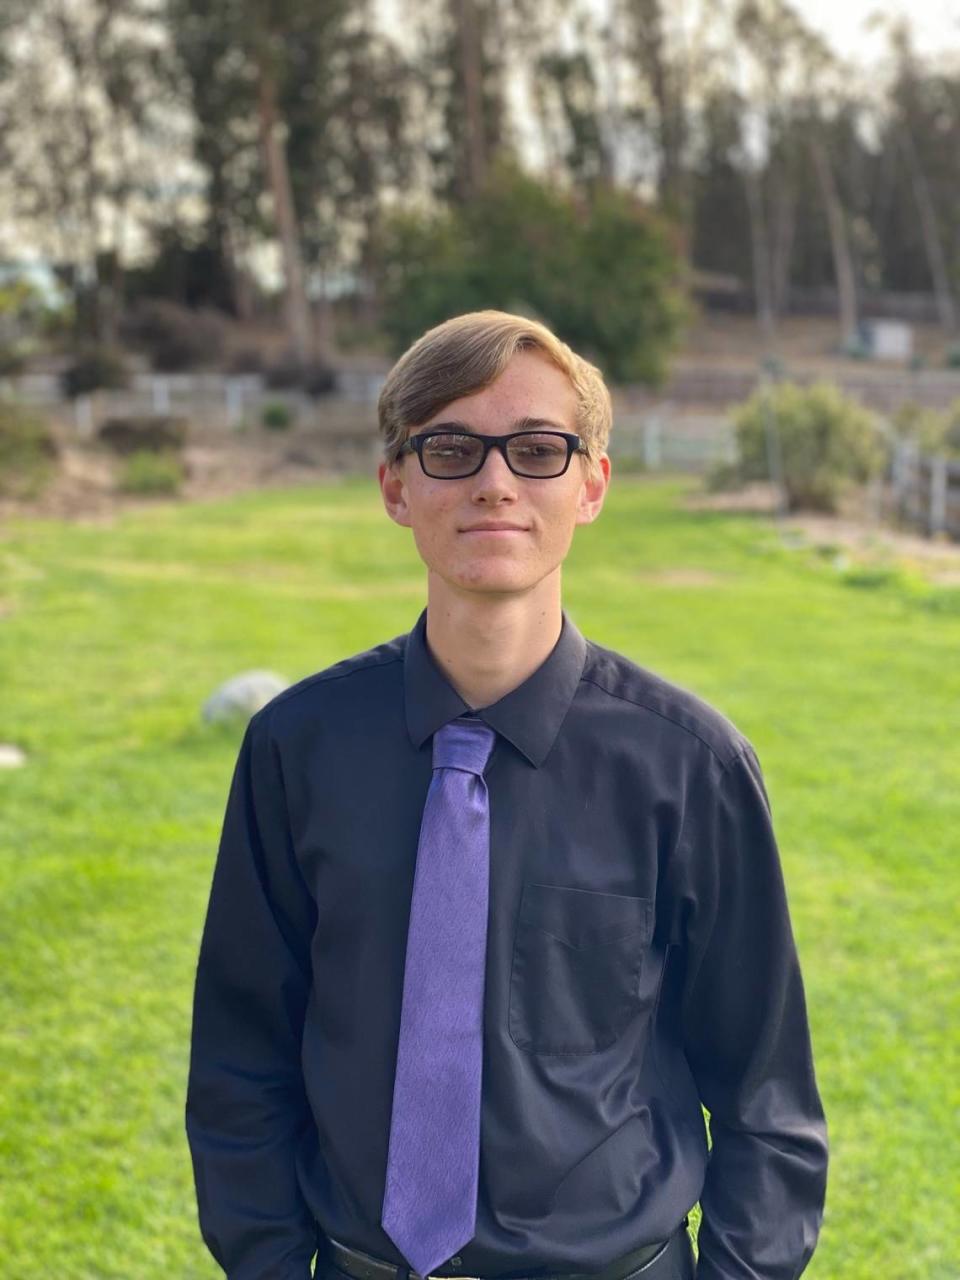 Griffin Miller, an 18-year-old Arroyo Grande resident, was killed in a car crash the evening of May 2, 2024. Miller was remembered by teachers and family as a smart, hardworking student with a natural gift for music. Bill Miller